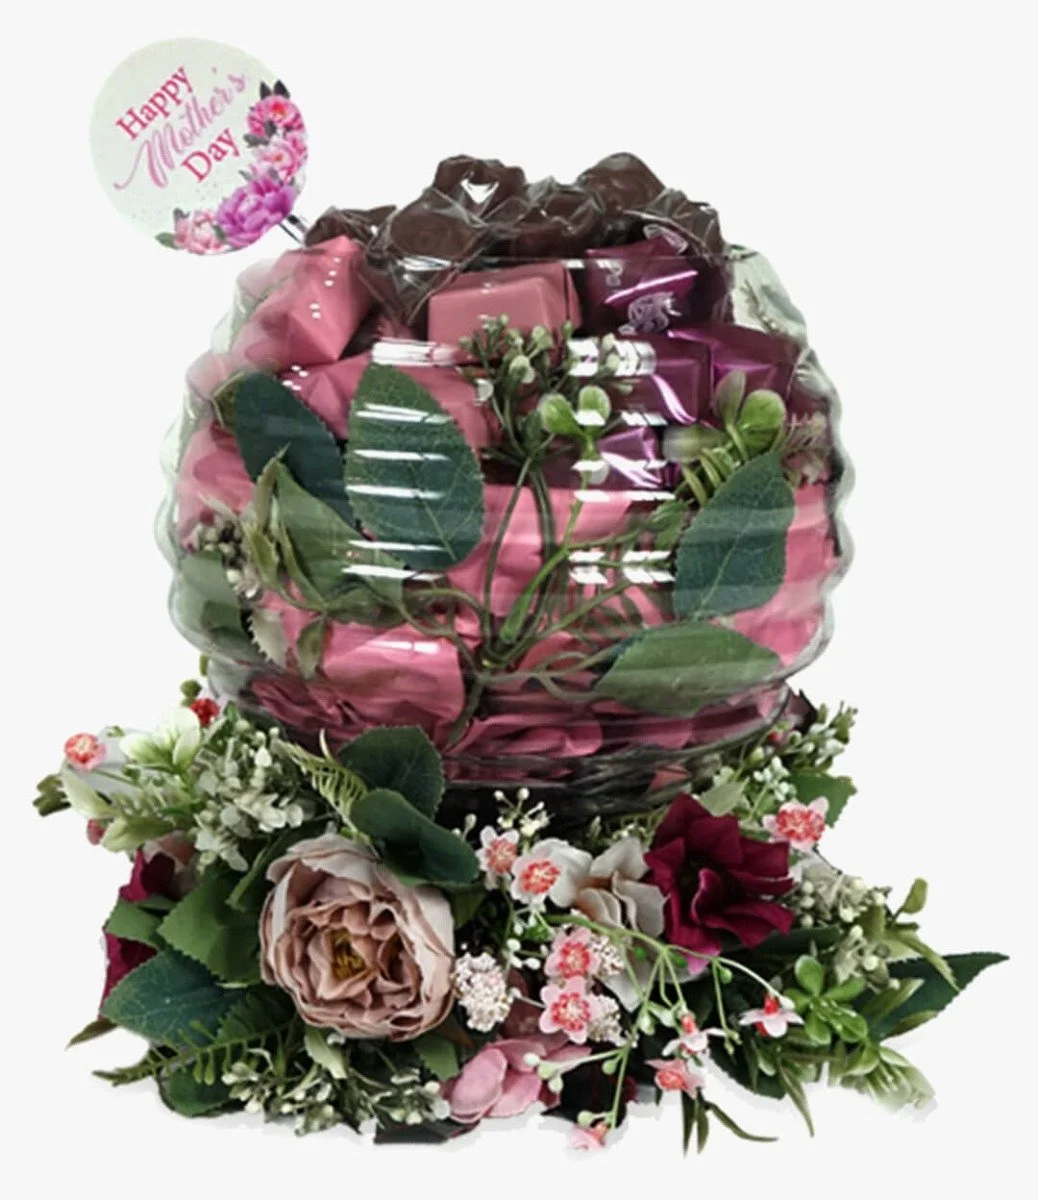 Pretty in Peony - Chocolate Vase By Blessing